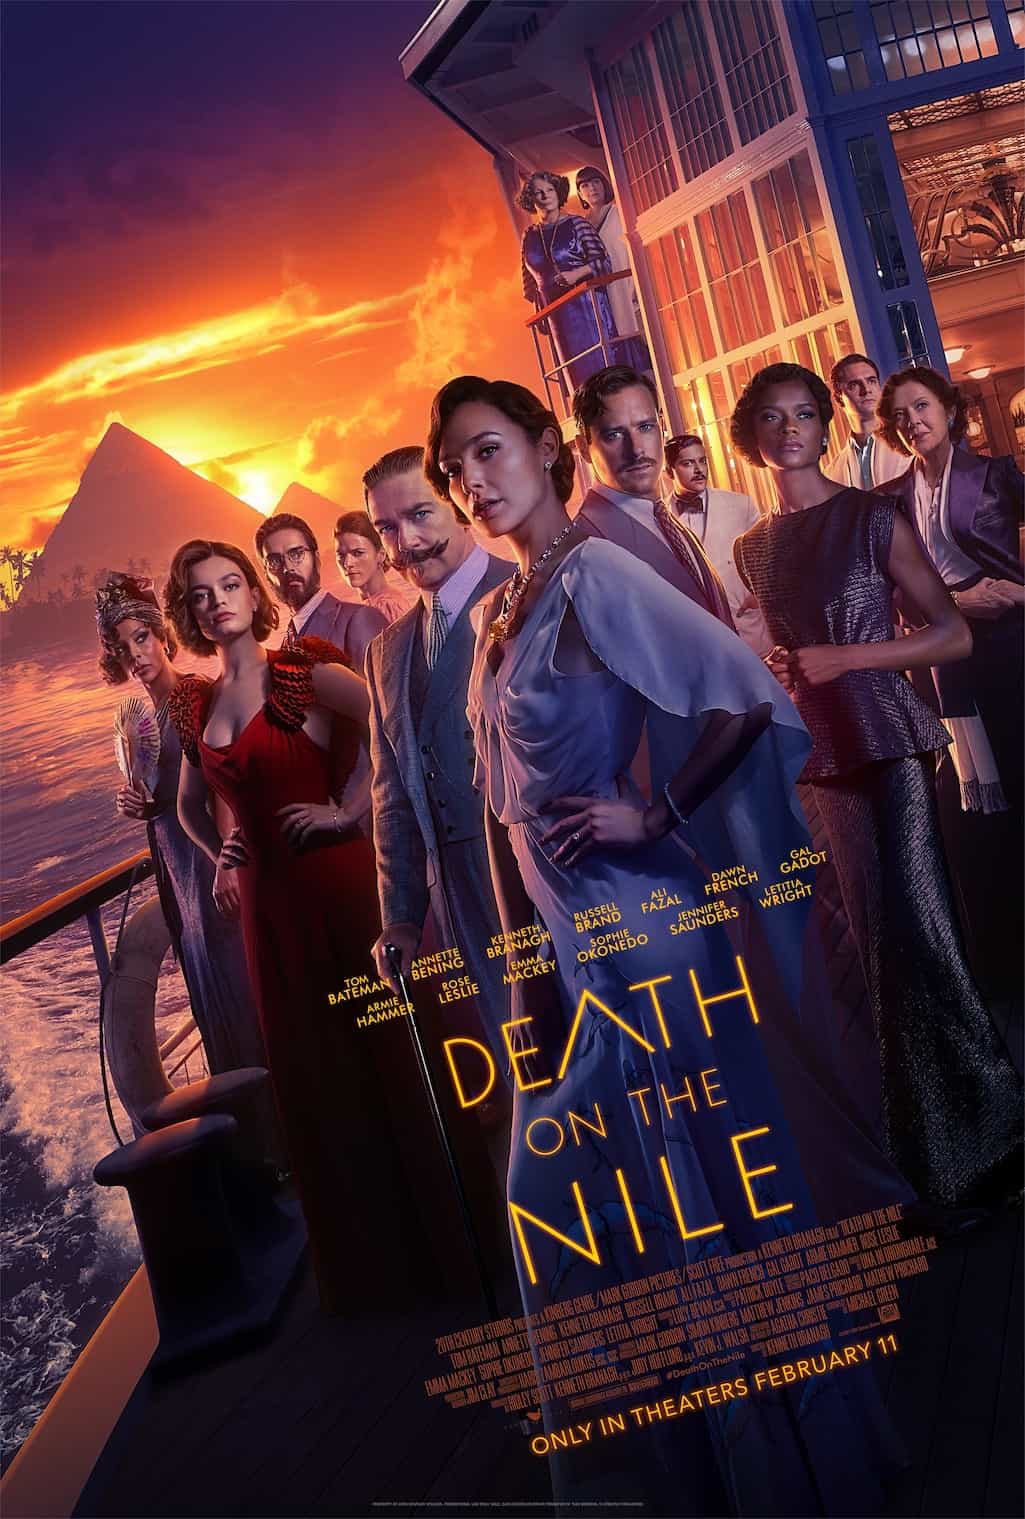 A new star studded poster is released for Death On the Nile which stars Gal Gadot among many others - movie release date 11th February 2022 #deathonthenile